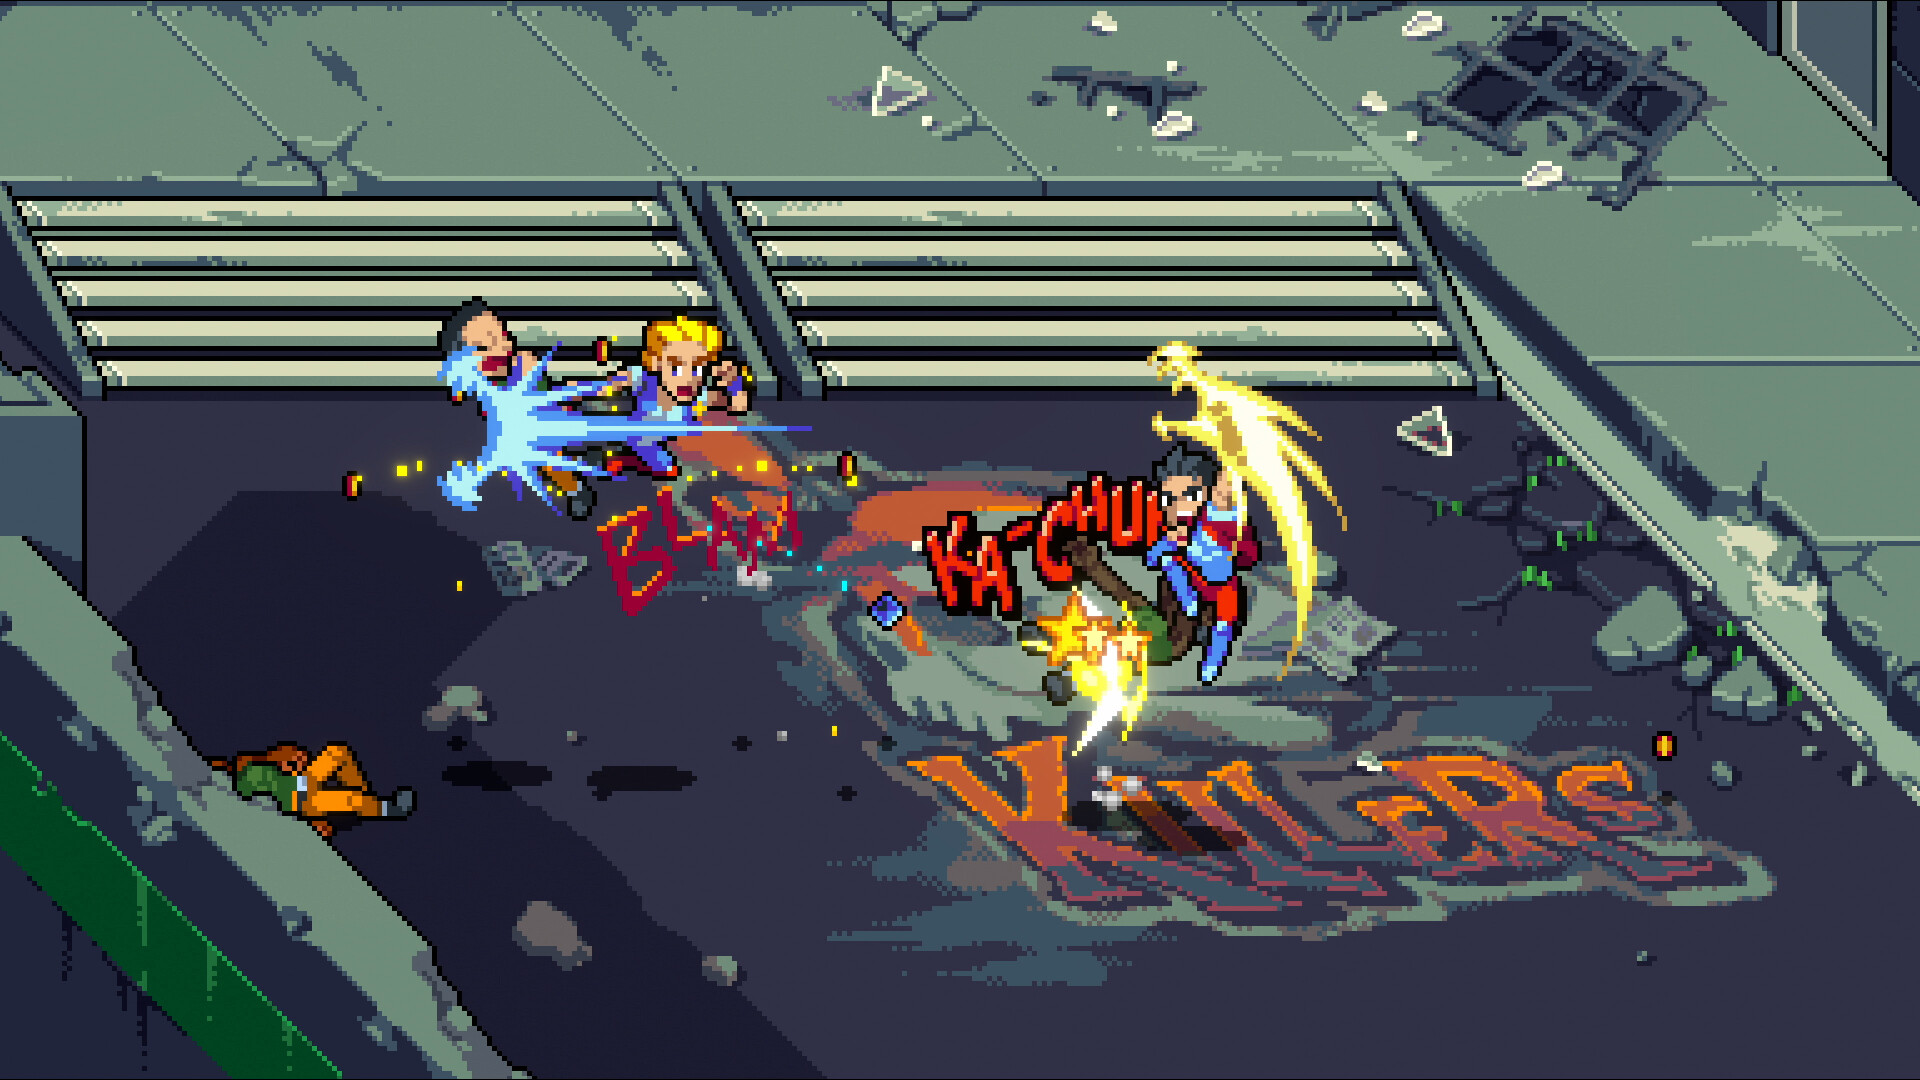 Double Dragon Gaiden: Rise of the Dragons review: Rogue-lite